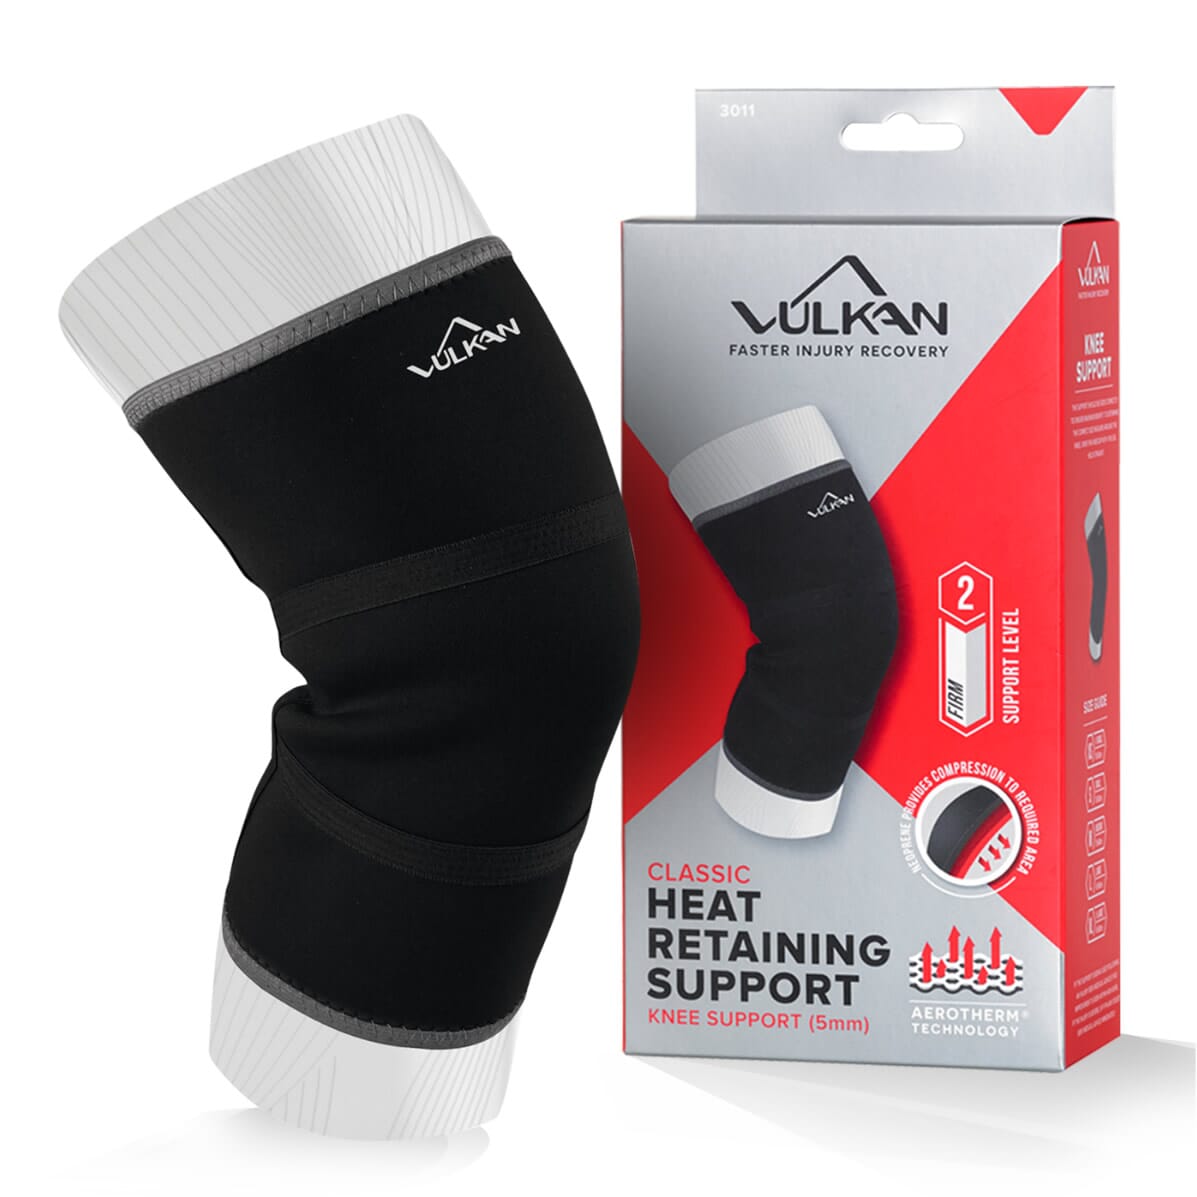 View Knee Support Vulkan Small 5mm thick information